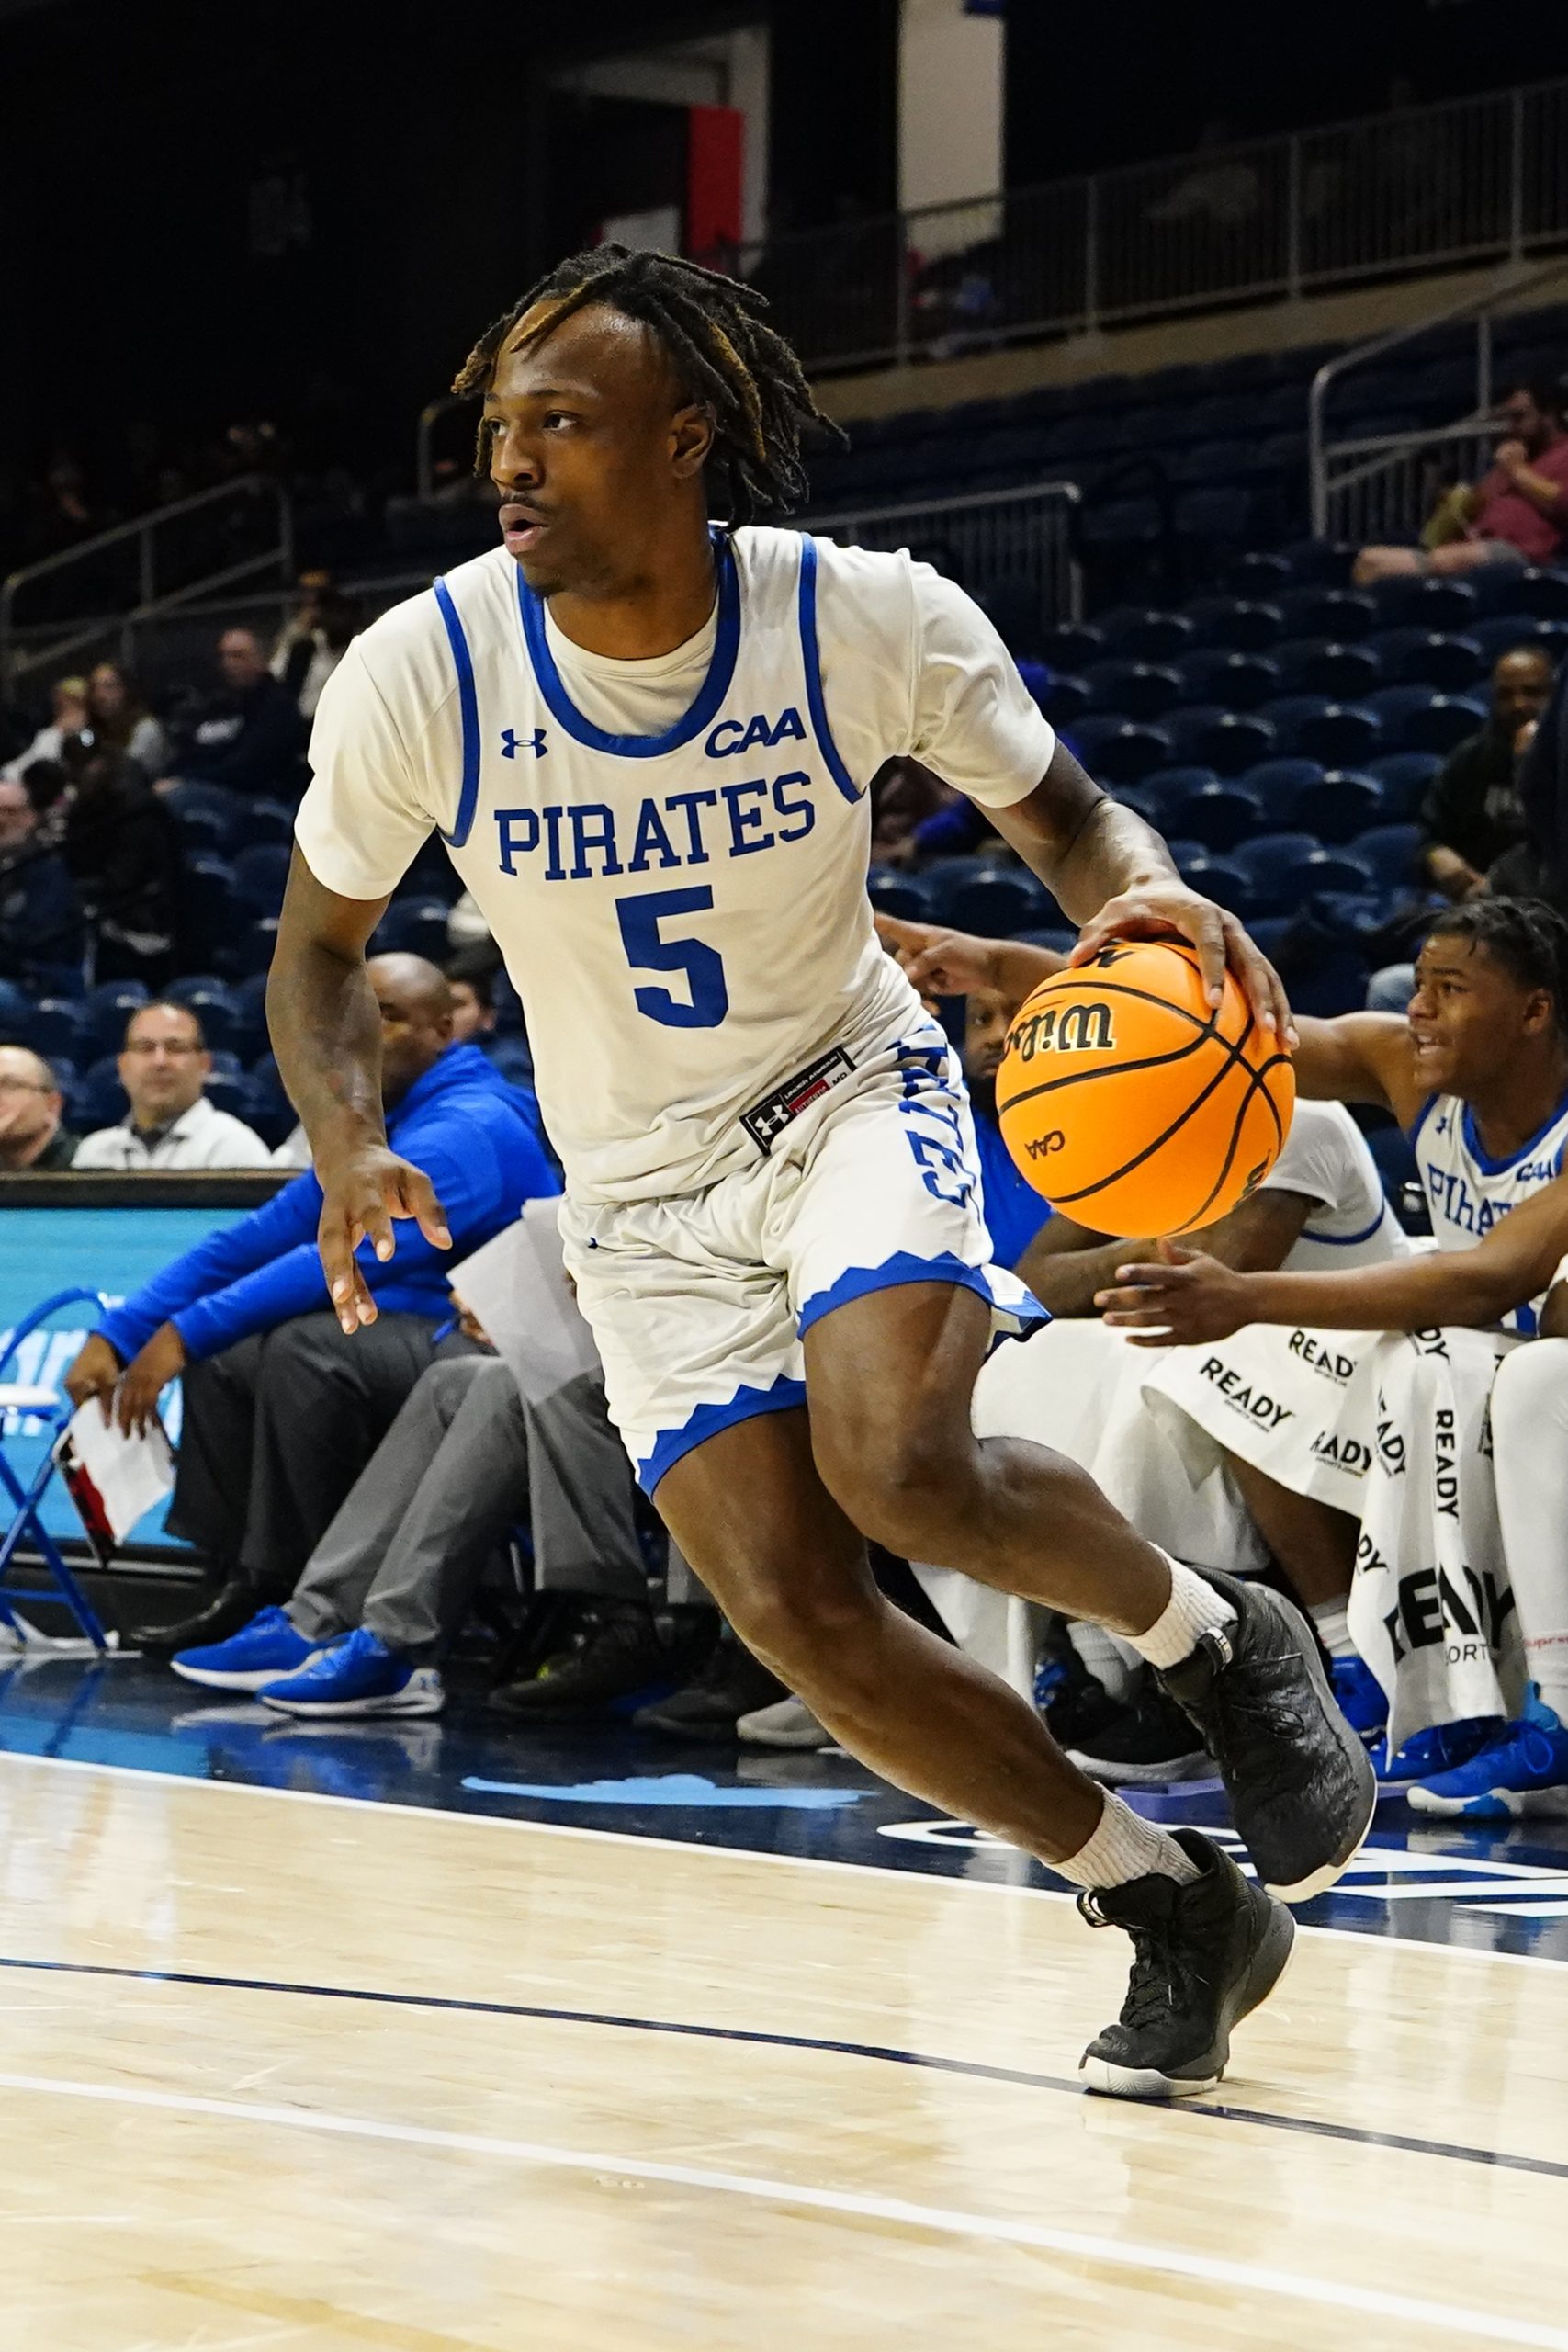 After Moving Conferences Twice, Hampton University is Looking to Make Some Noise in the CAA